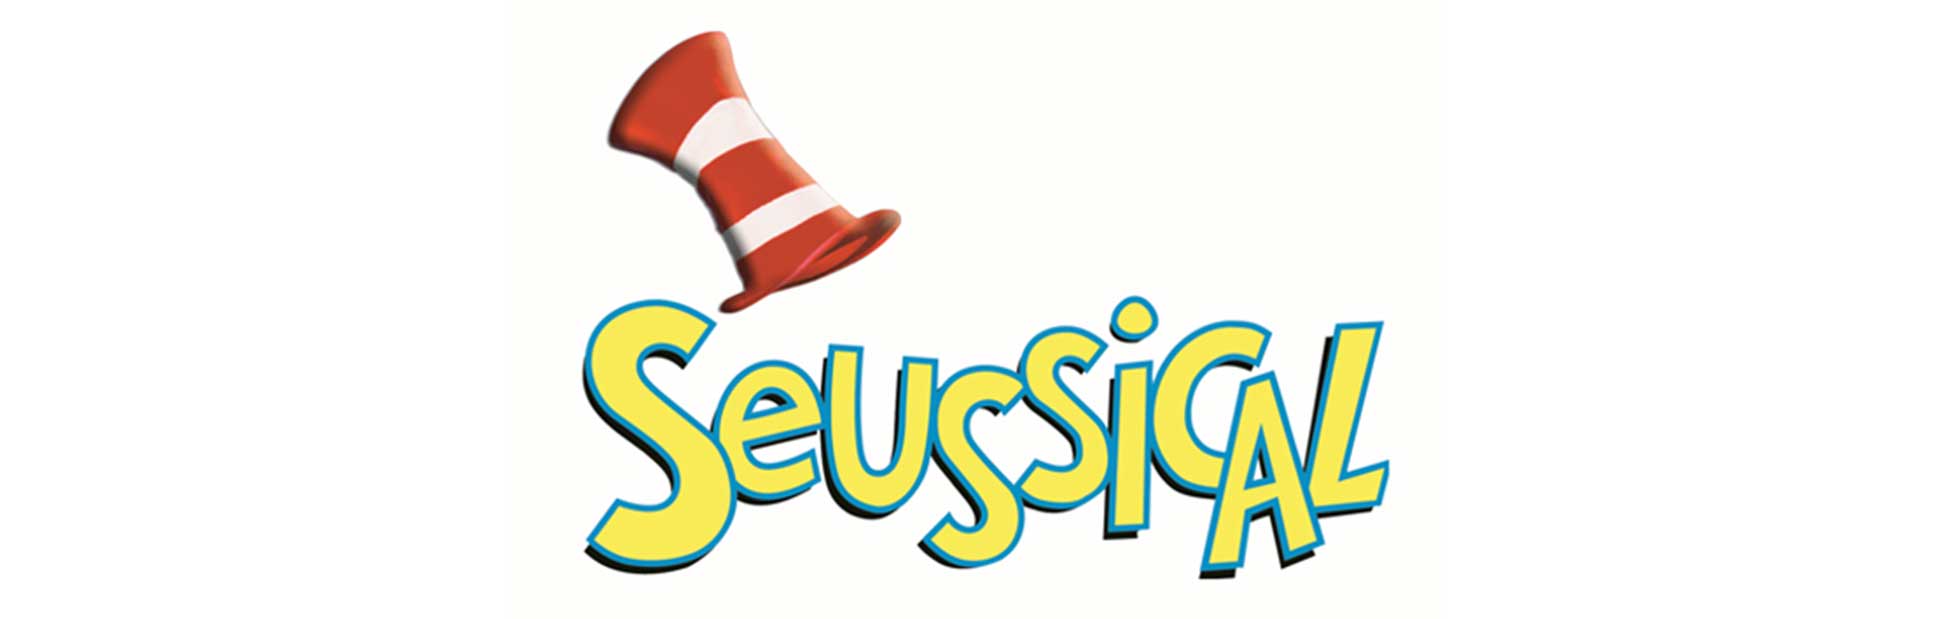 Top hat and cartoon letters of SEUSSICAL